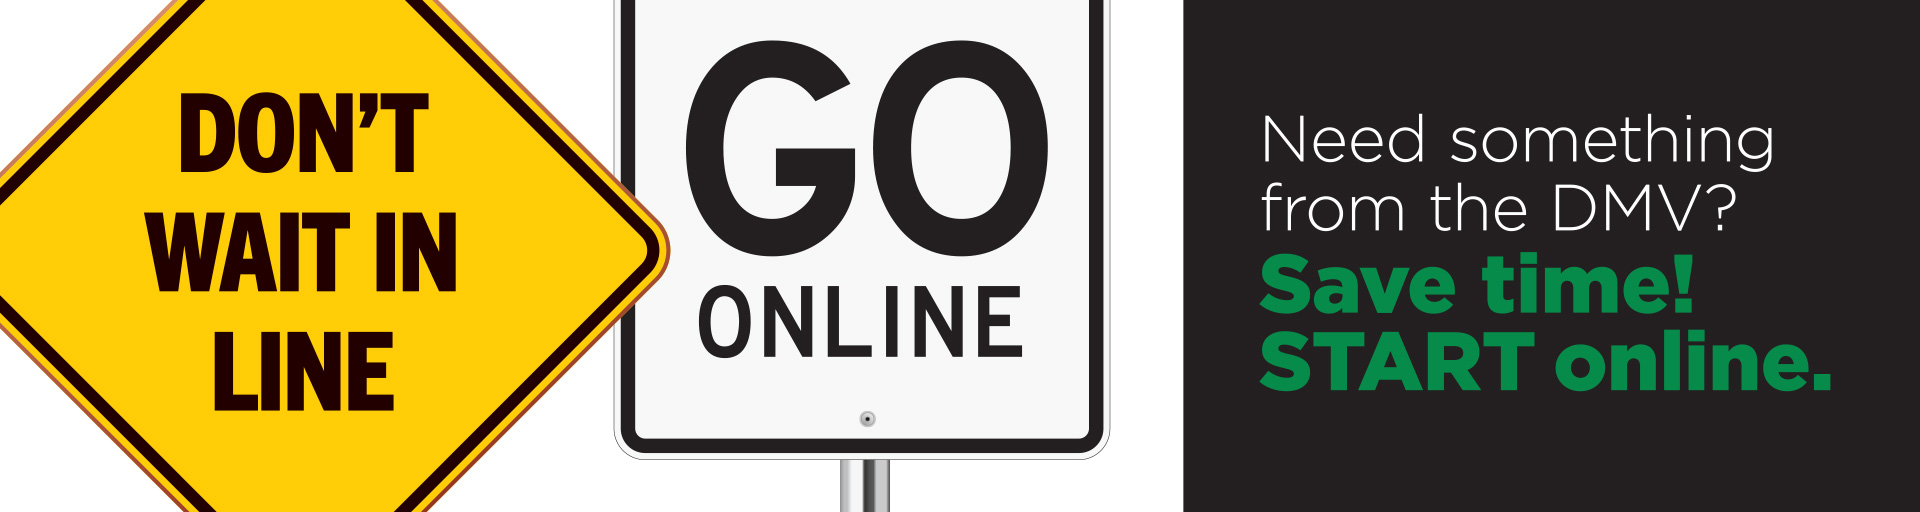 signs saying "Don't wait in line" and "GO ONLINE"